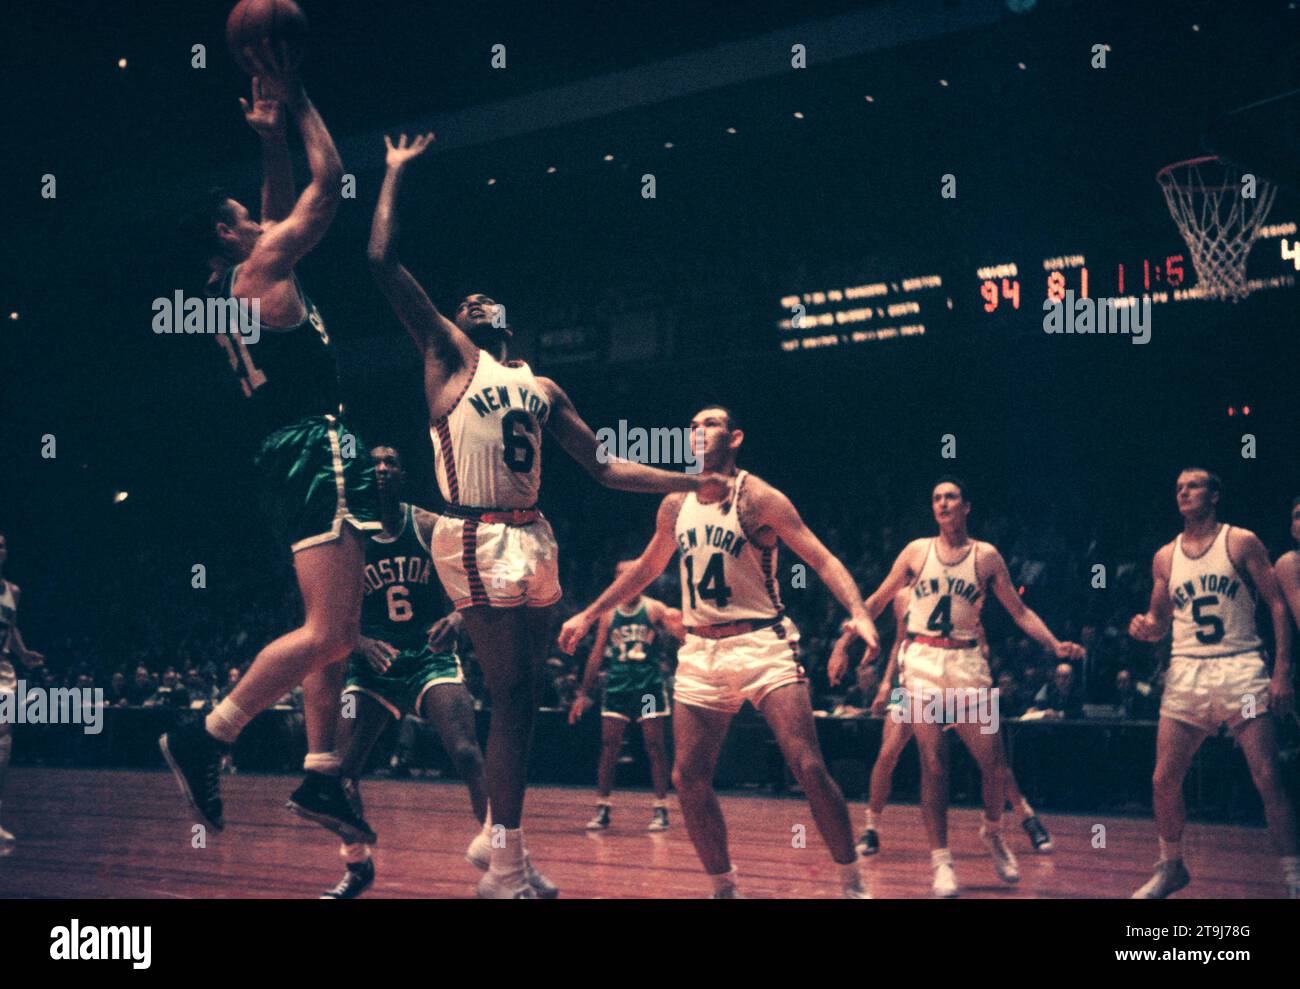 NEW YORK, NY - OCTOBER 25: Bill Sharman #21 of the Boston Celtics shoots as Willie Naulls #6 of the New York Knicks defends during an NBA game on October 25, 1958 at the Madison Square Garden in New York, New York.  (Photo by Hy Peskin) *** Local Caption *** Bill Sharman;Willie Naulls Stock Photo